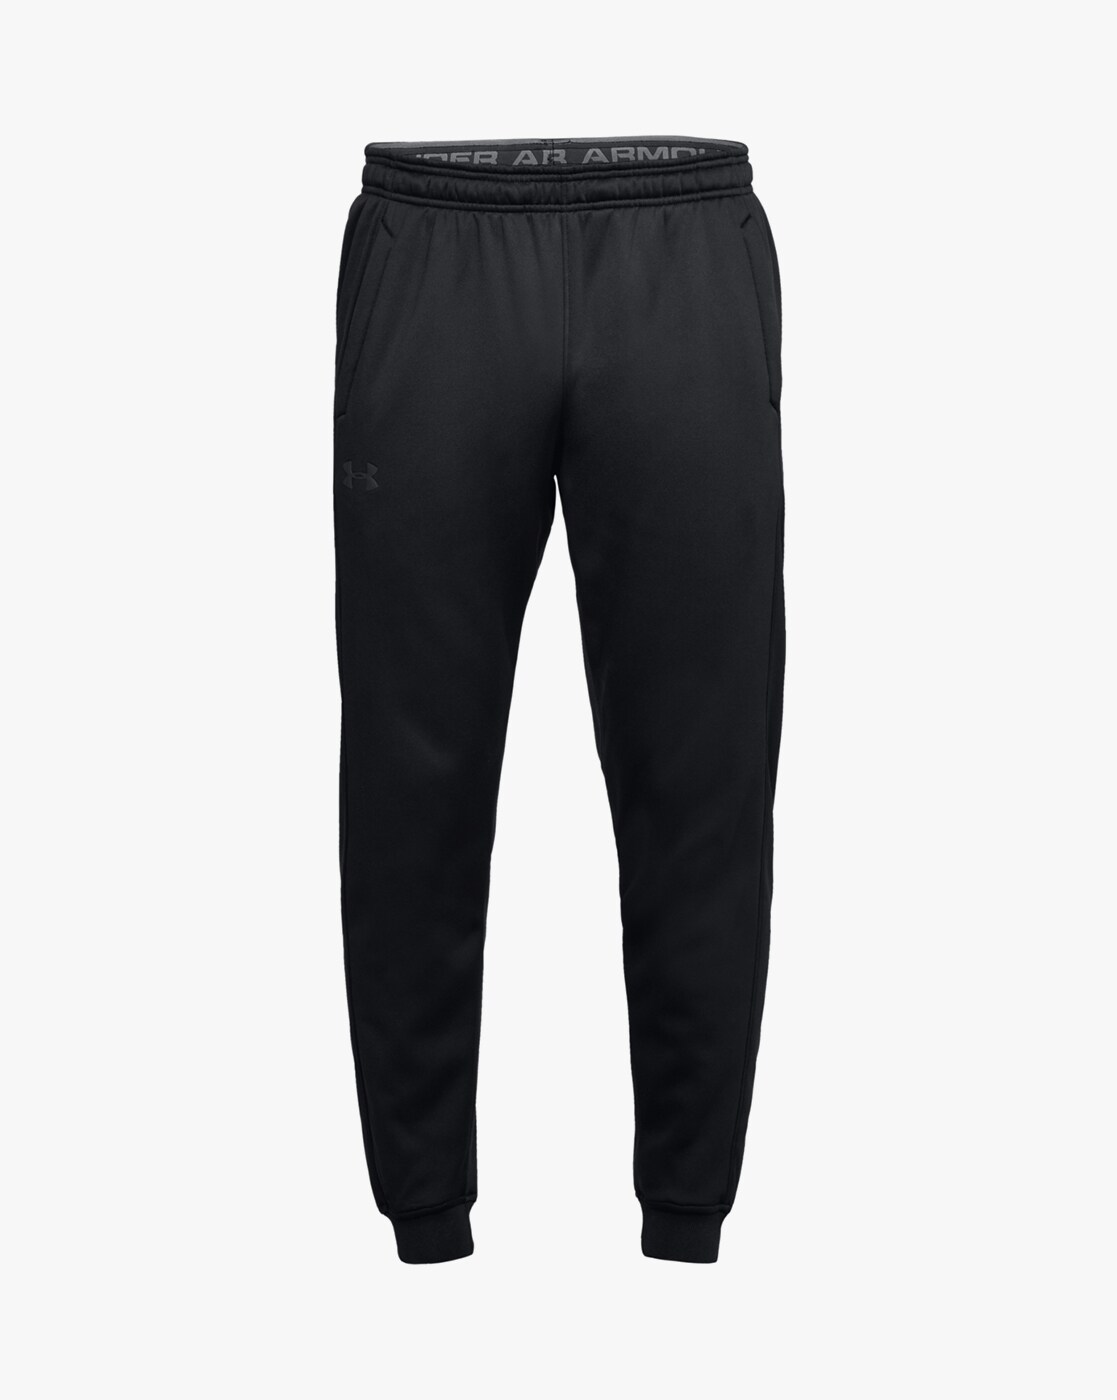 Buy Black Track Pants for Men by Under Armour Online